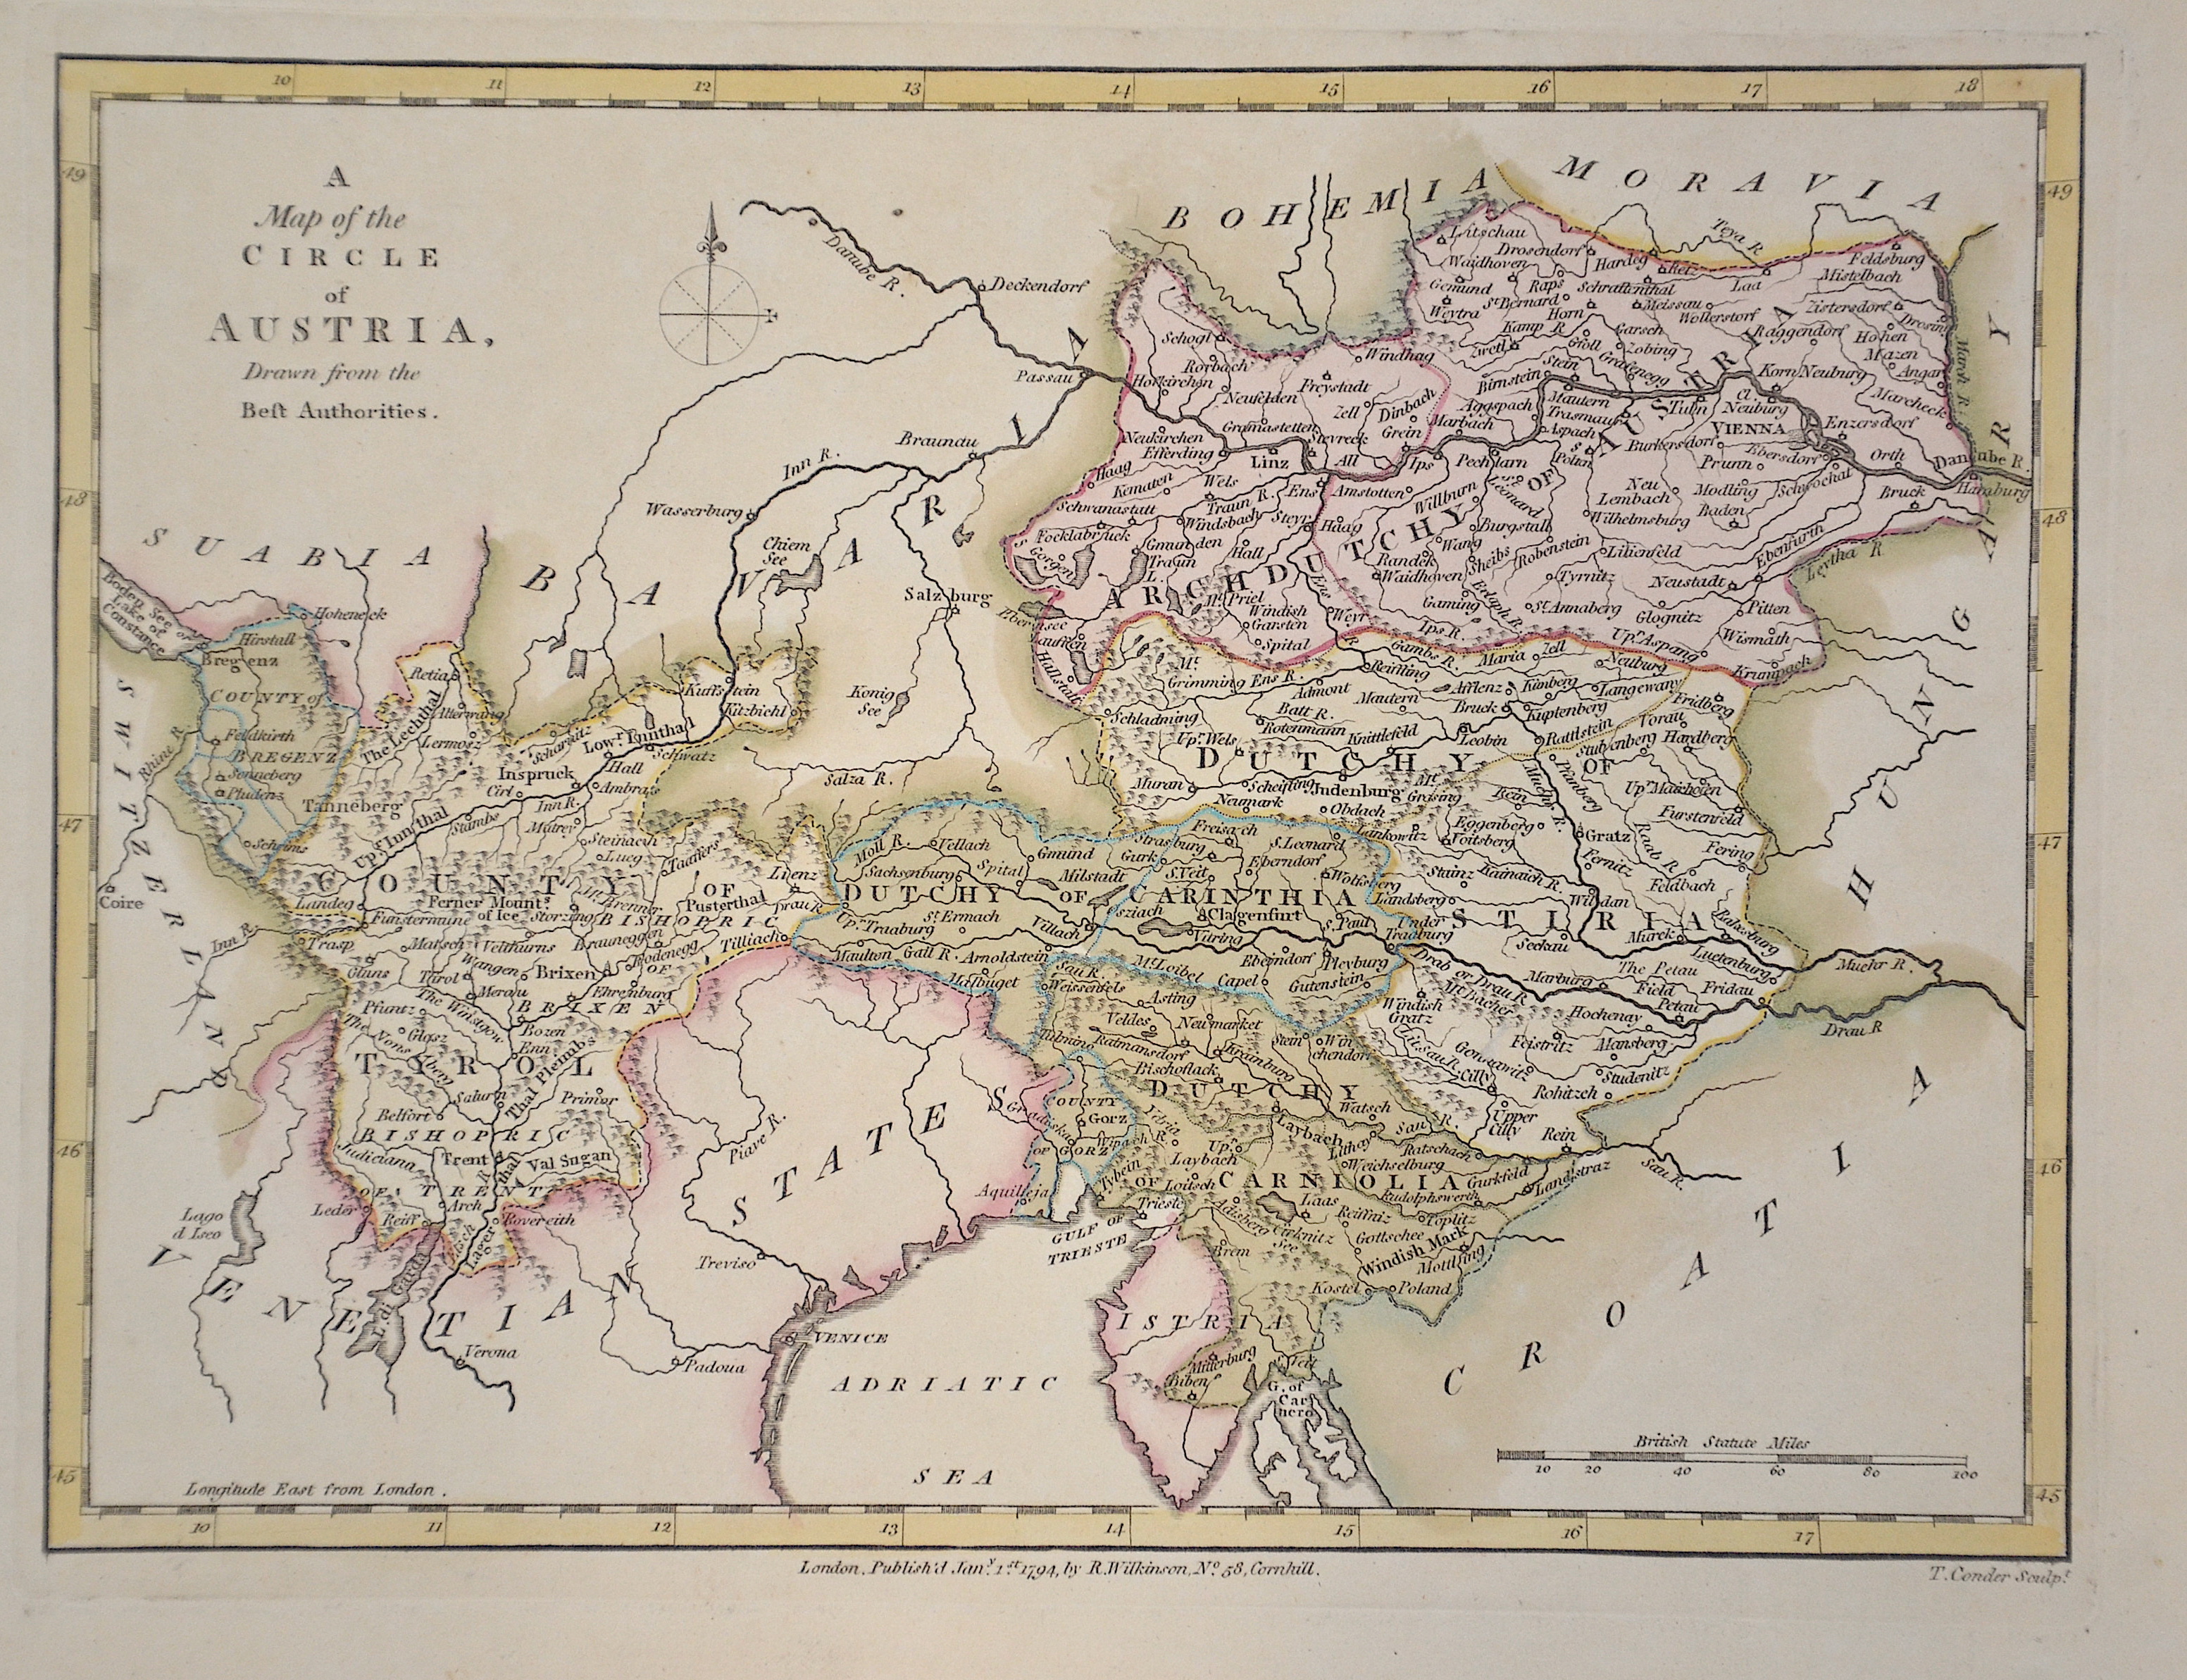 Wilkinson R. A Map of the Circle of Austria.